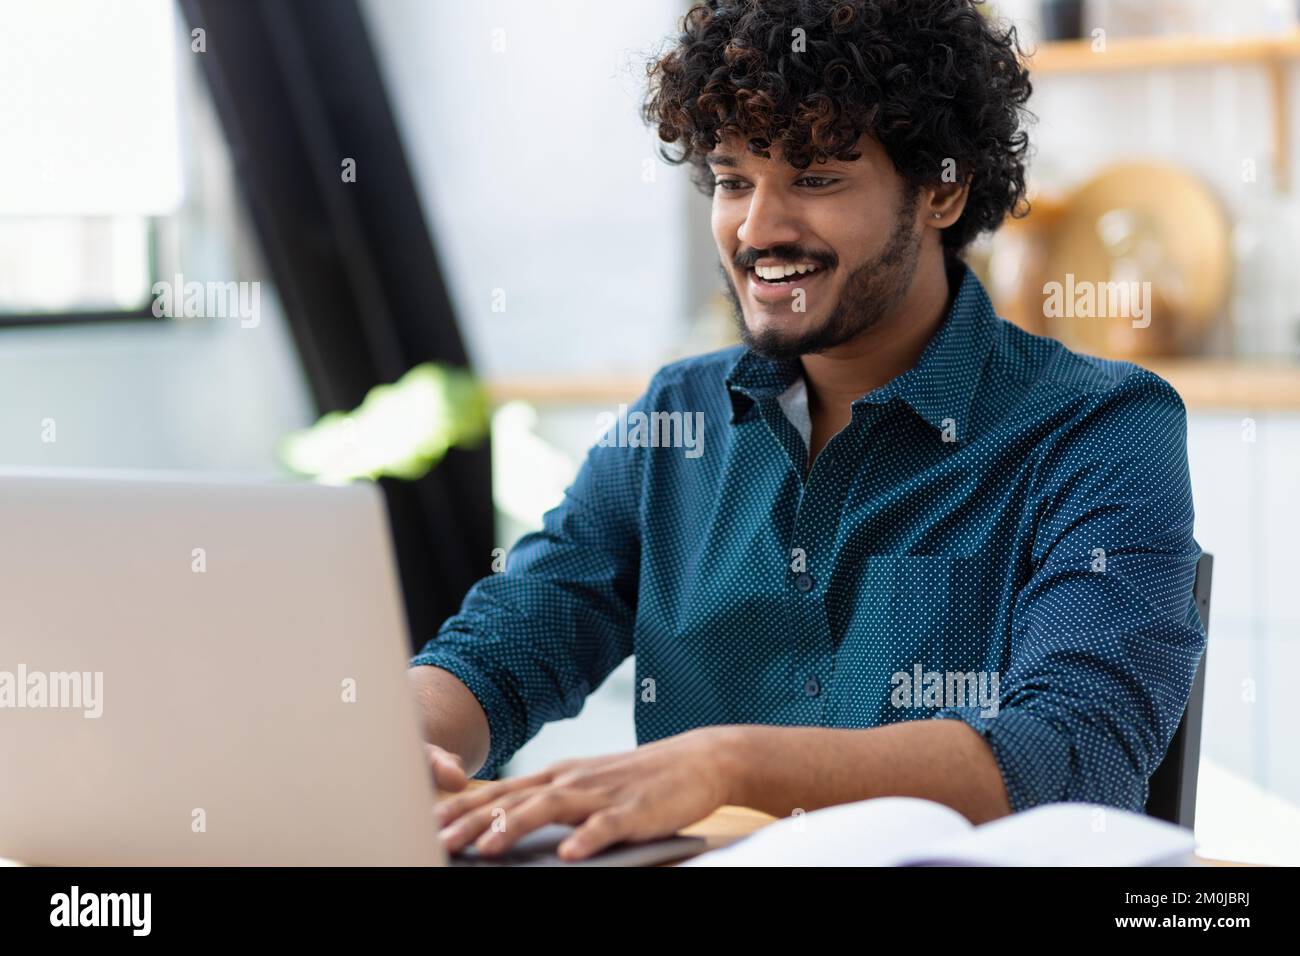 man freelancer using laptop computer typing working online coworking or modern office Distance learning online education Stock Photo